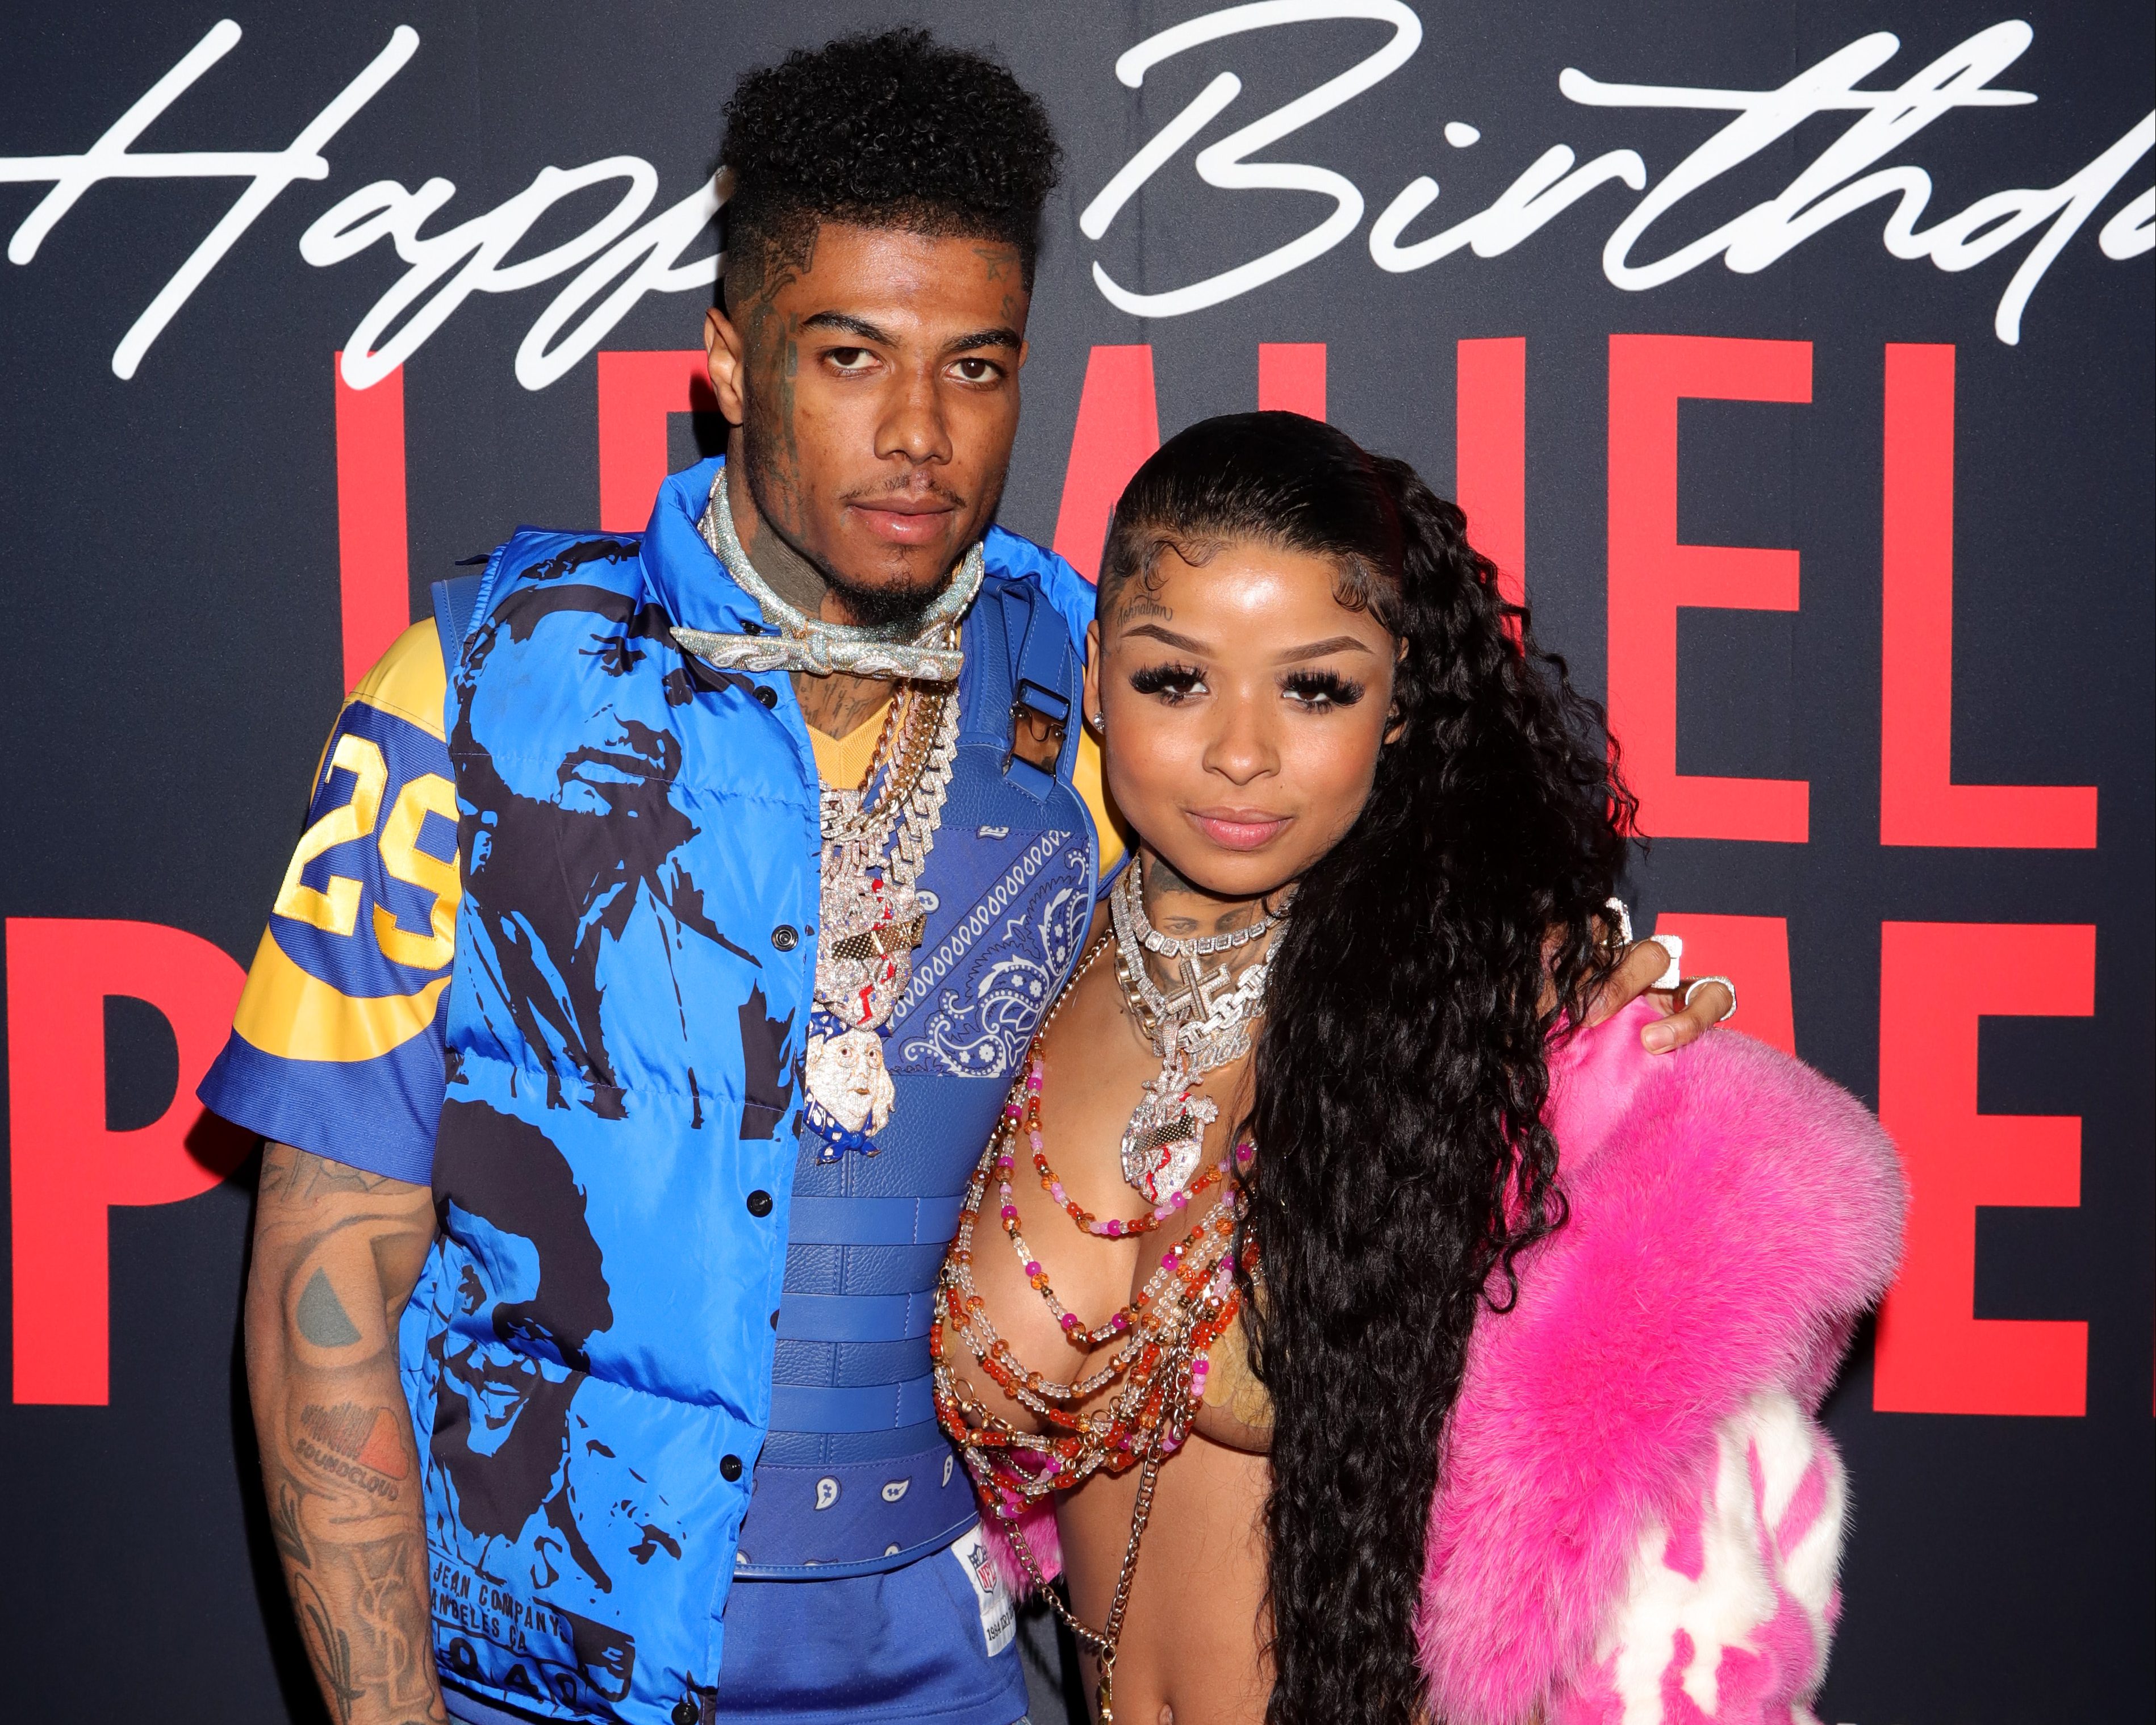 Chrisean Rock Appears To Clap Back At Blueface: “N*ggas Gotta Stop Being Lame”